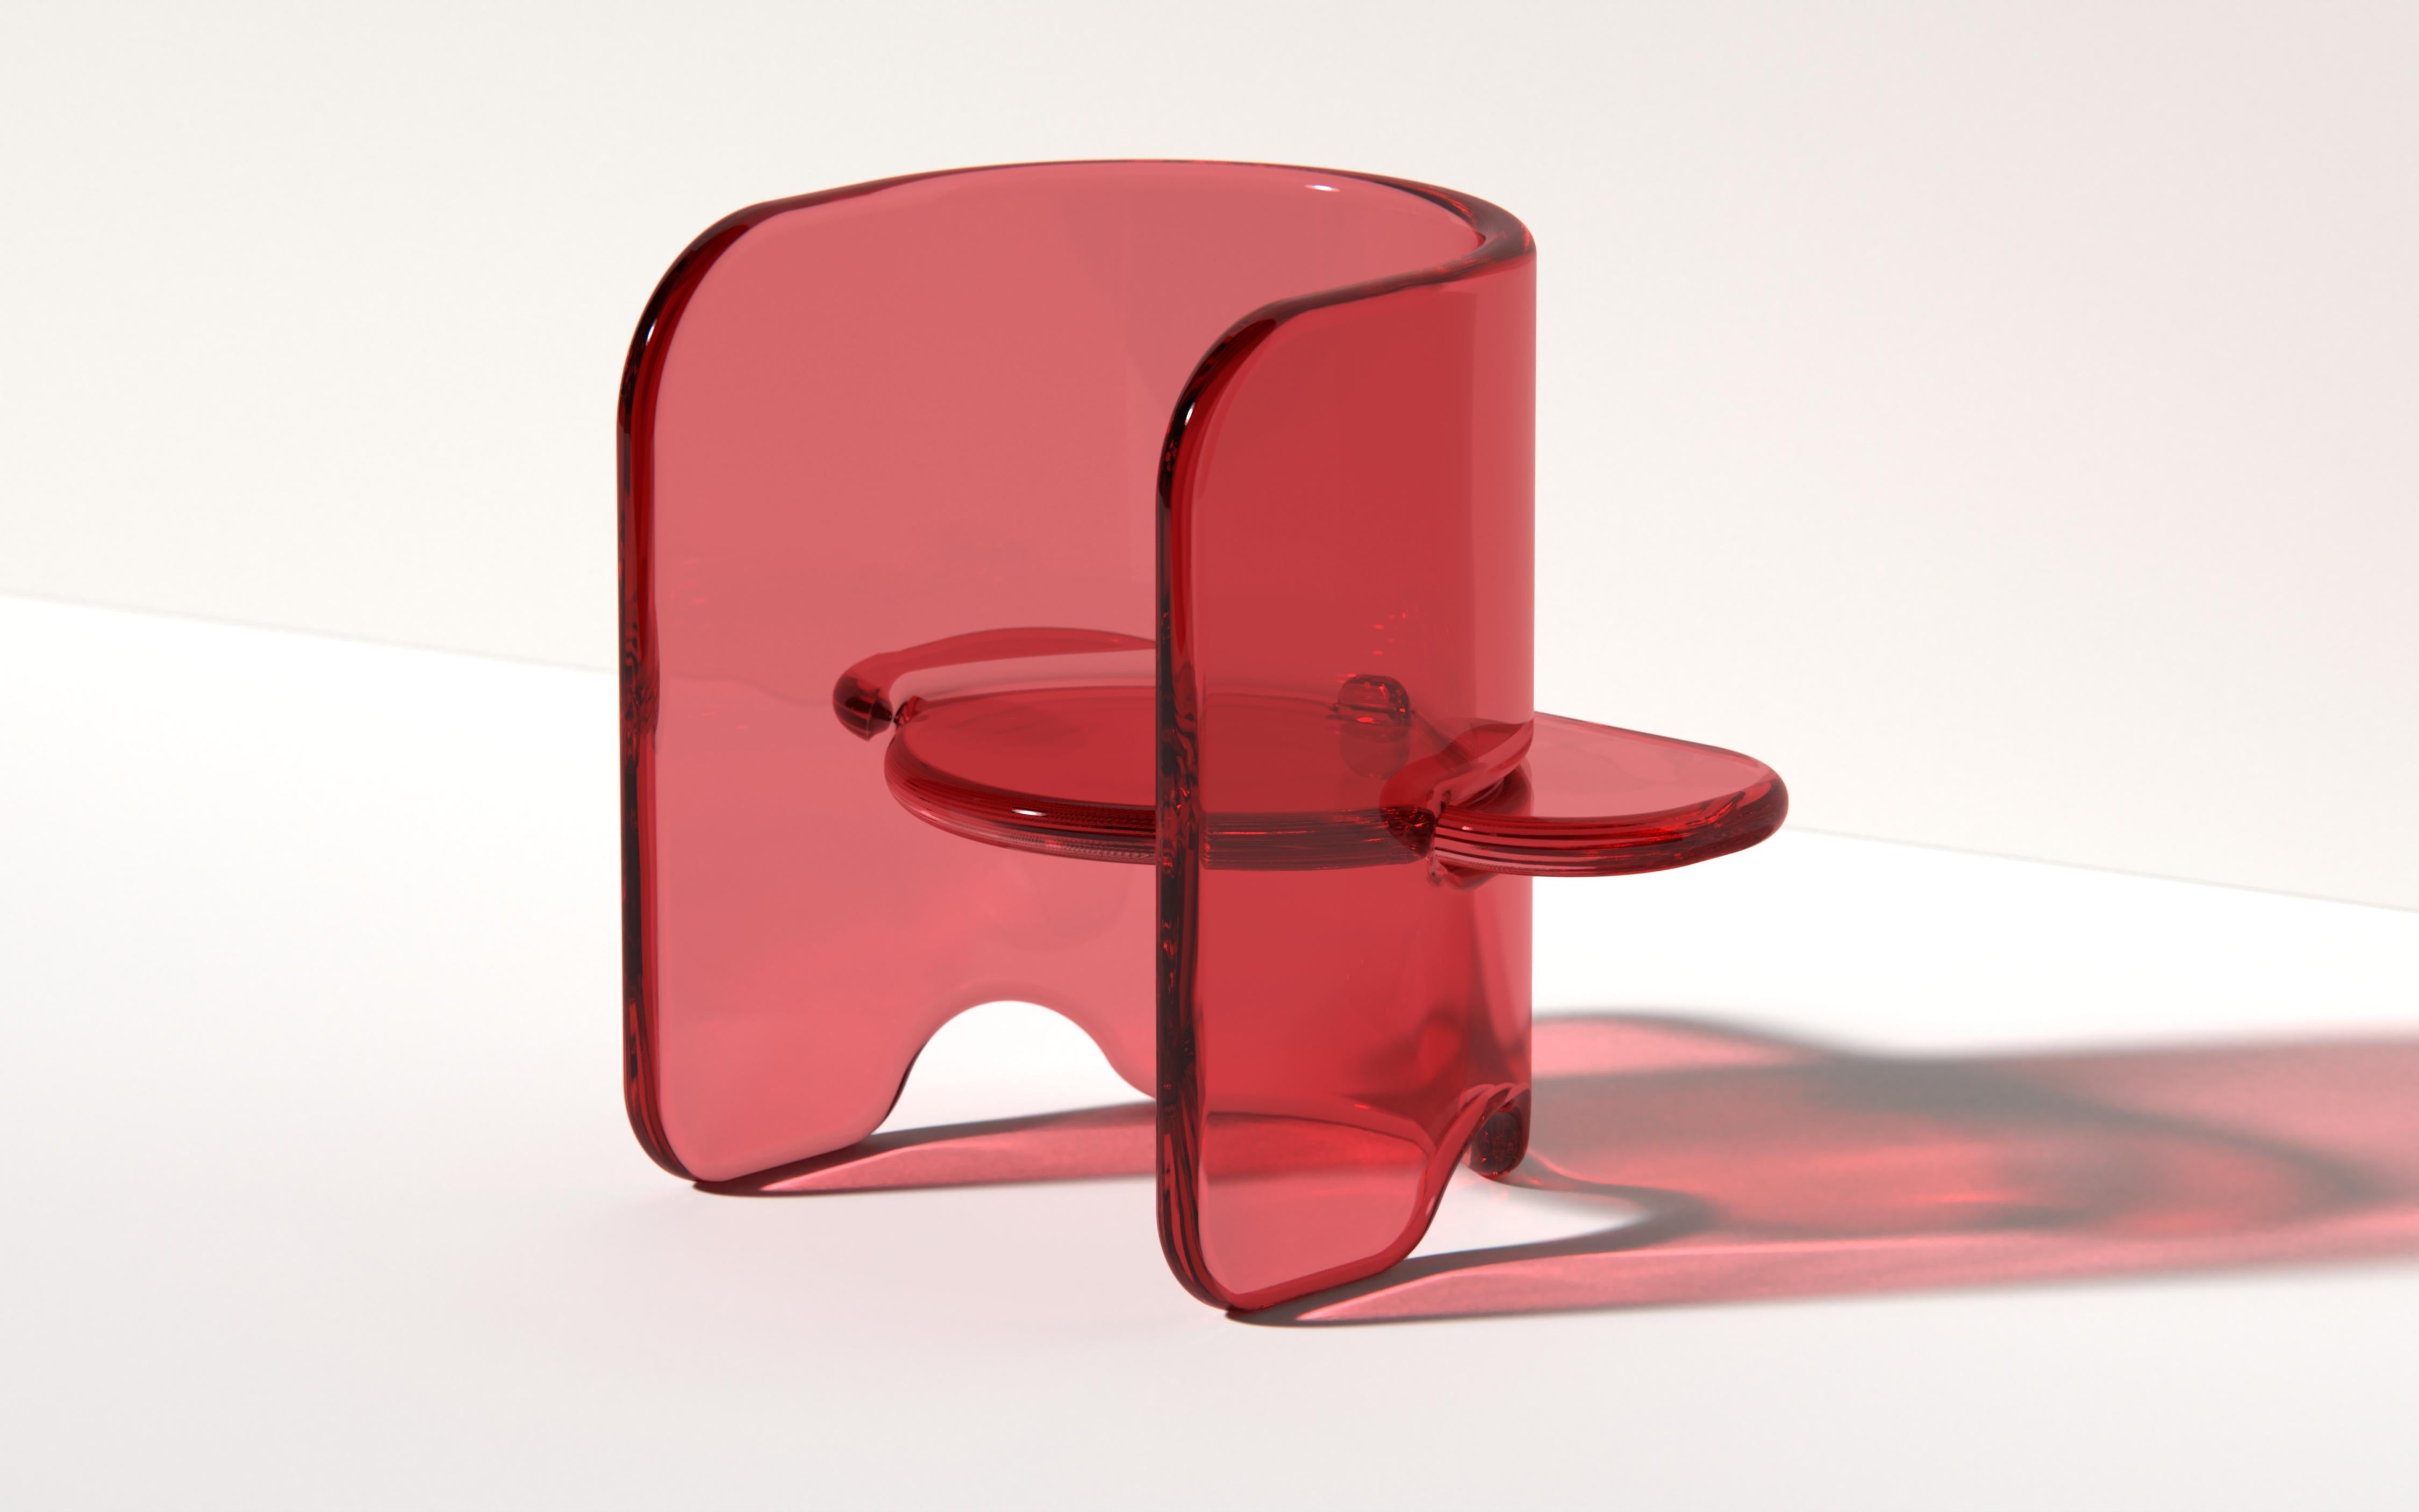 Resin Plump Chair by Ian Cochran, Represented by Tuleste Factory For Sale